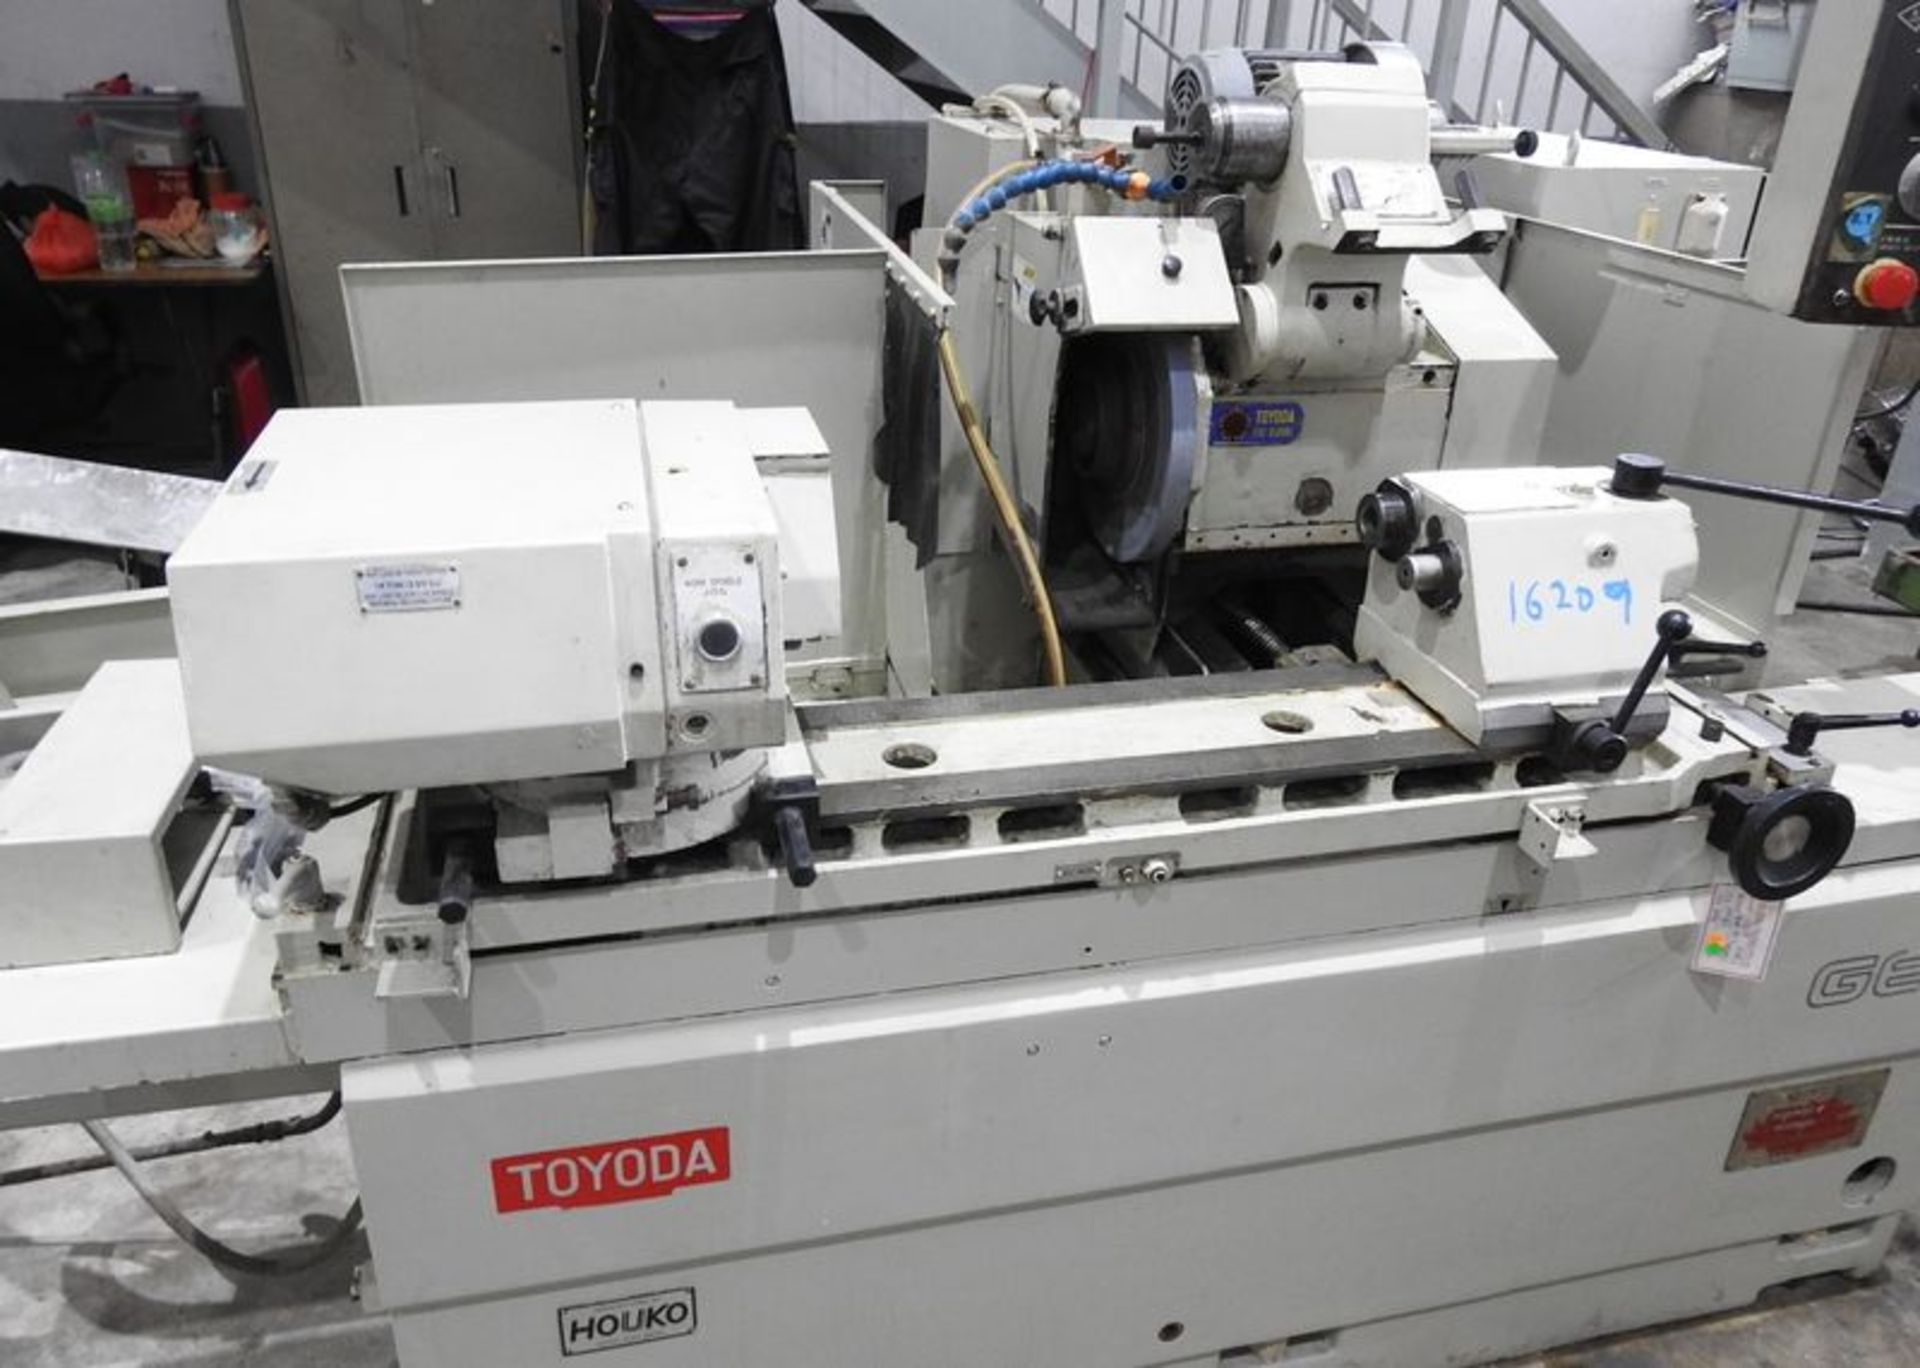 12.6"X19.7" TOYODA GE4P-50 CNC PLAIN CYLINDRICAL GRINDER W/INTERNAL GRINDING ATTACHMENT - Image 5 of 8